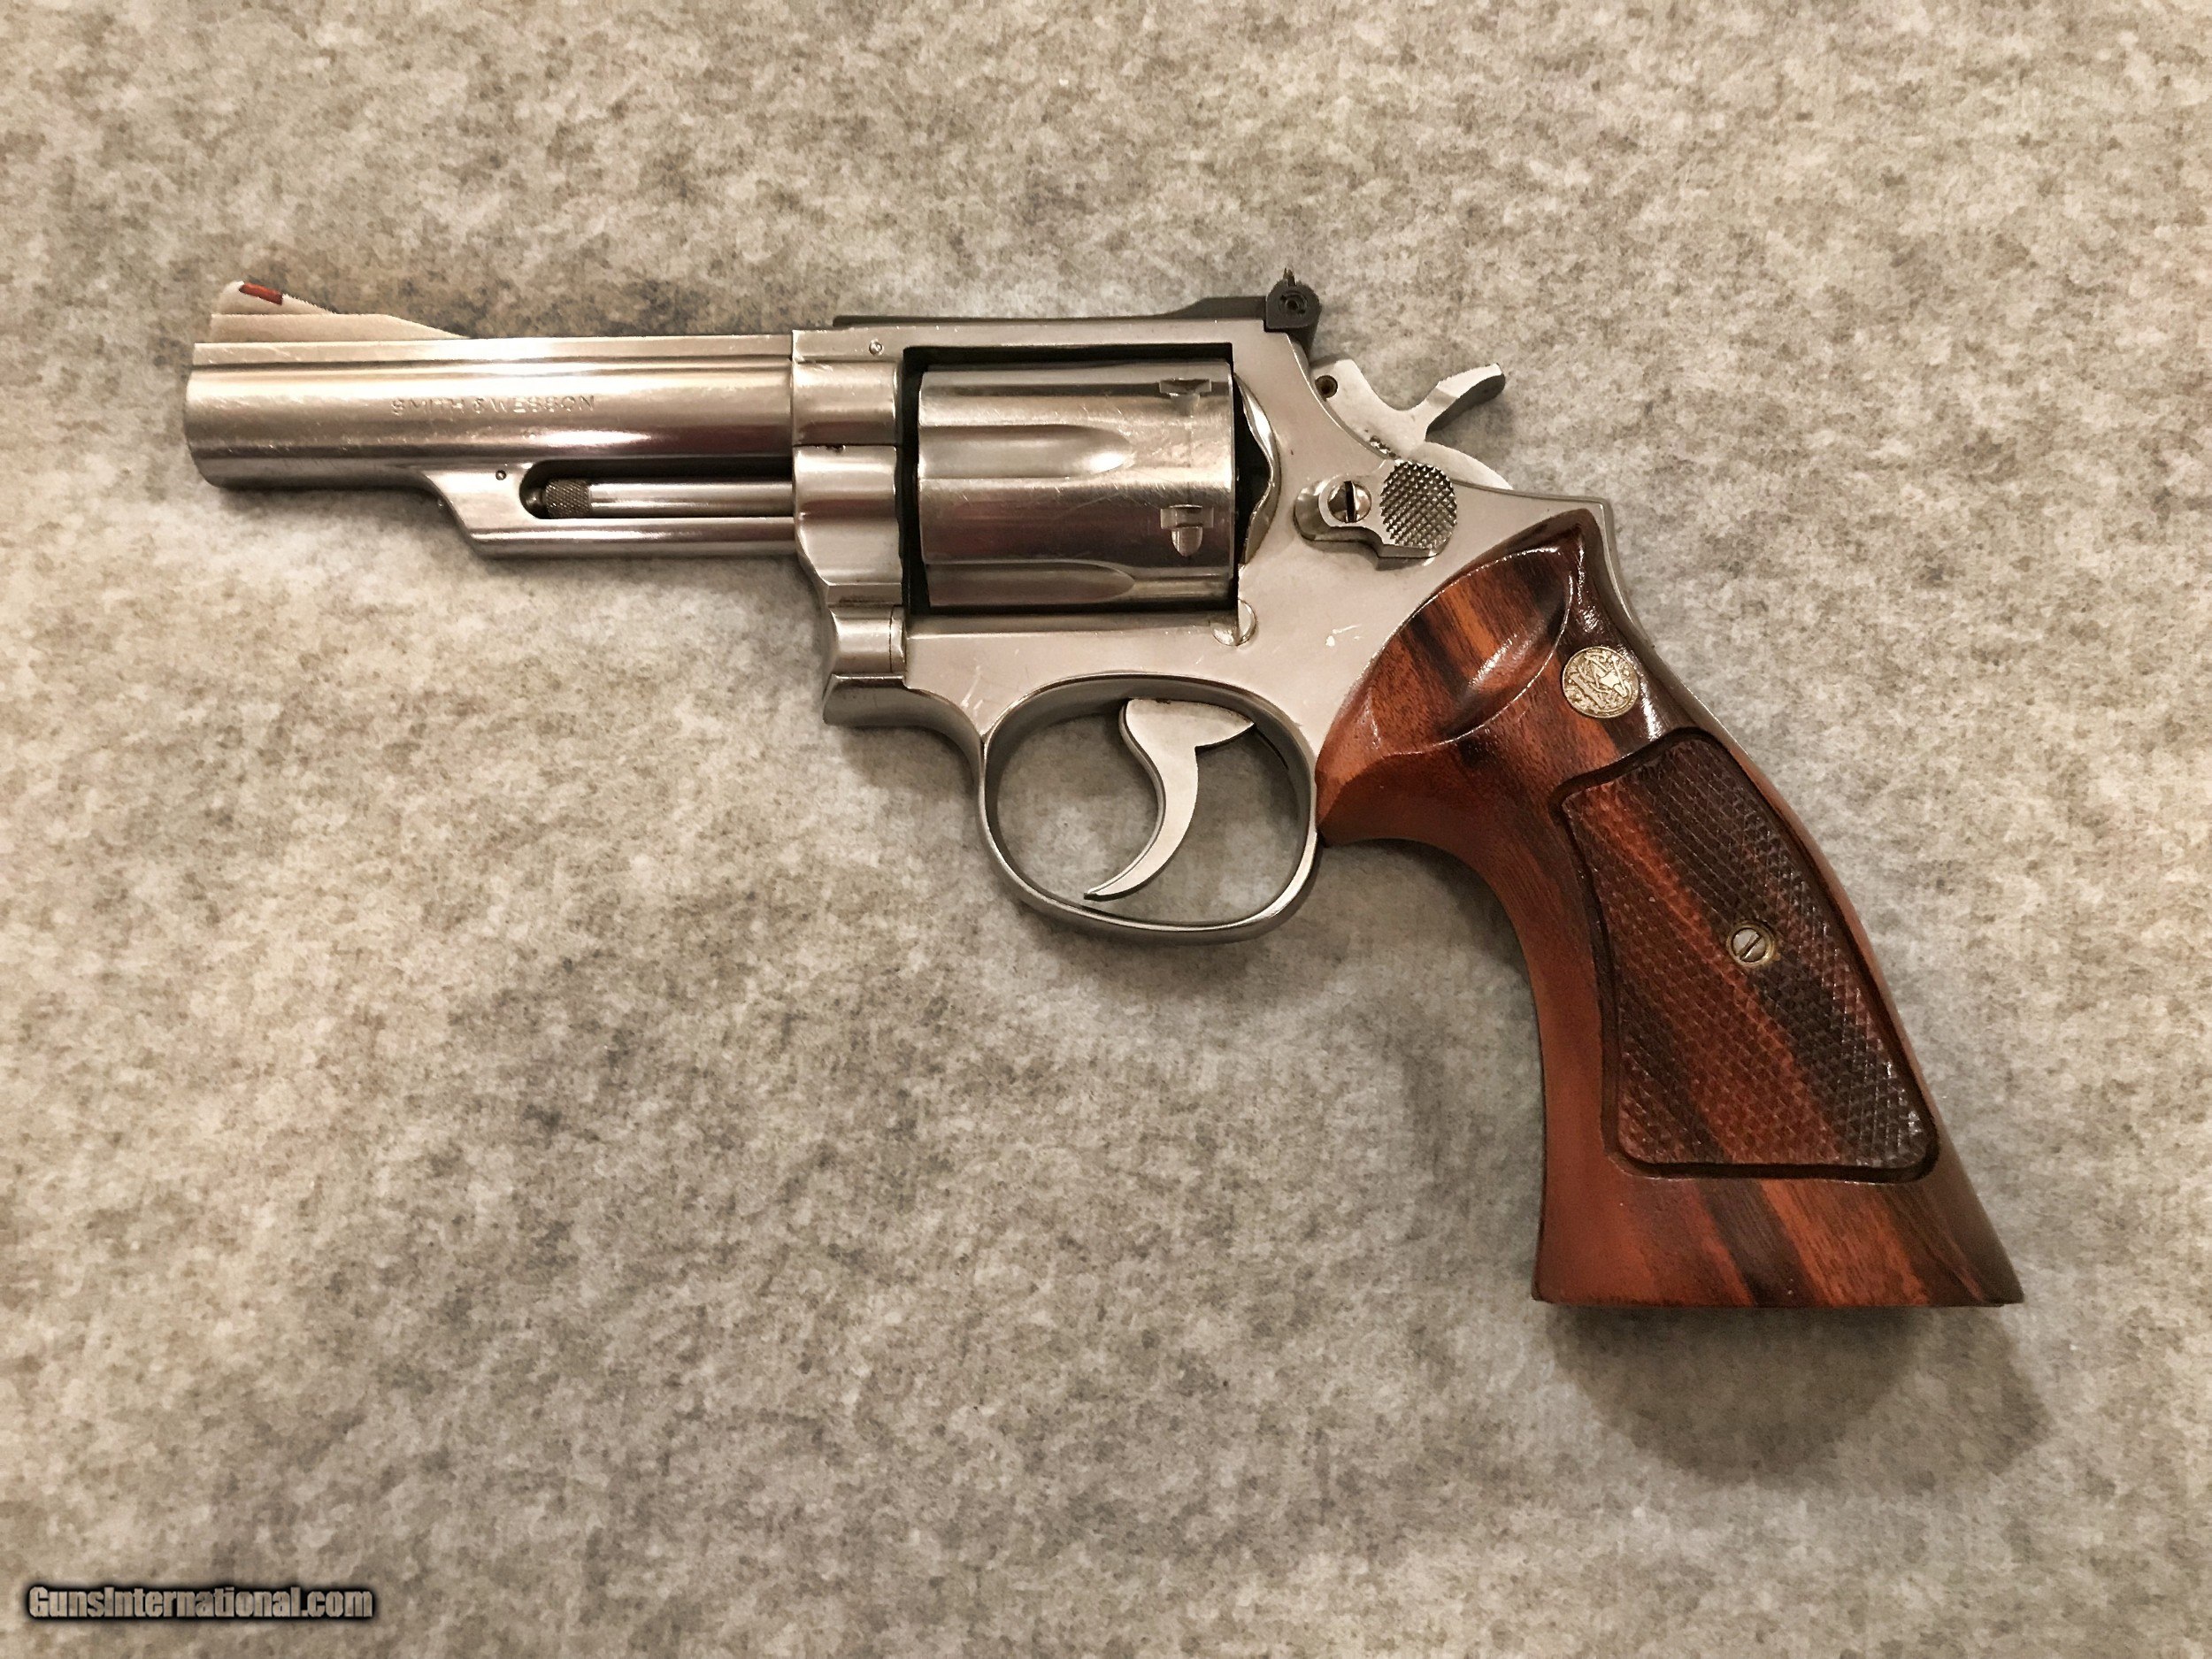 Picked up this S&W 66-1 4 inch. full of rust, Page 2